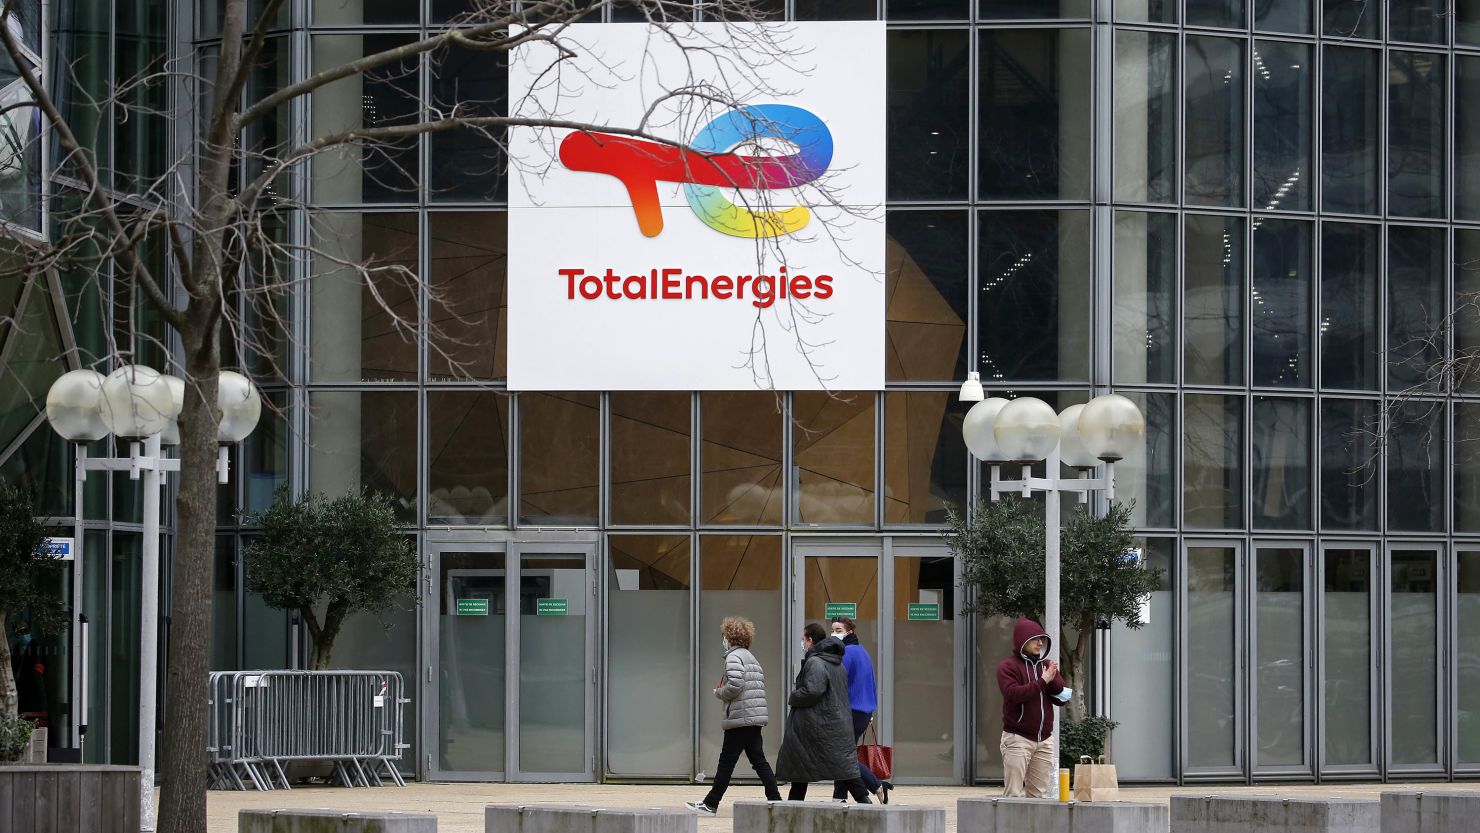 The head office of TotalEnergies in the La Defense business district near Paris, seen in February 2022.